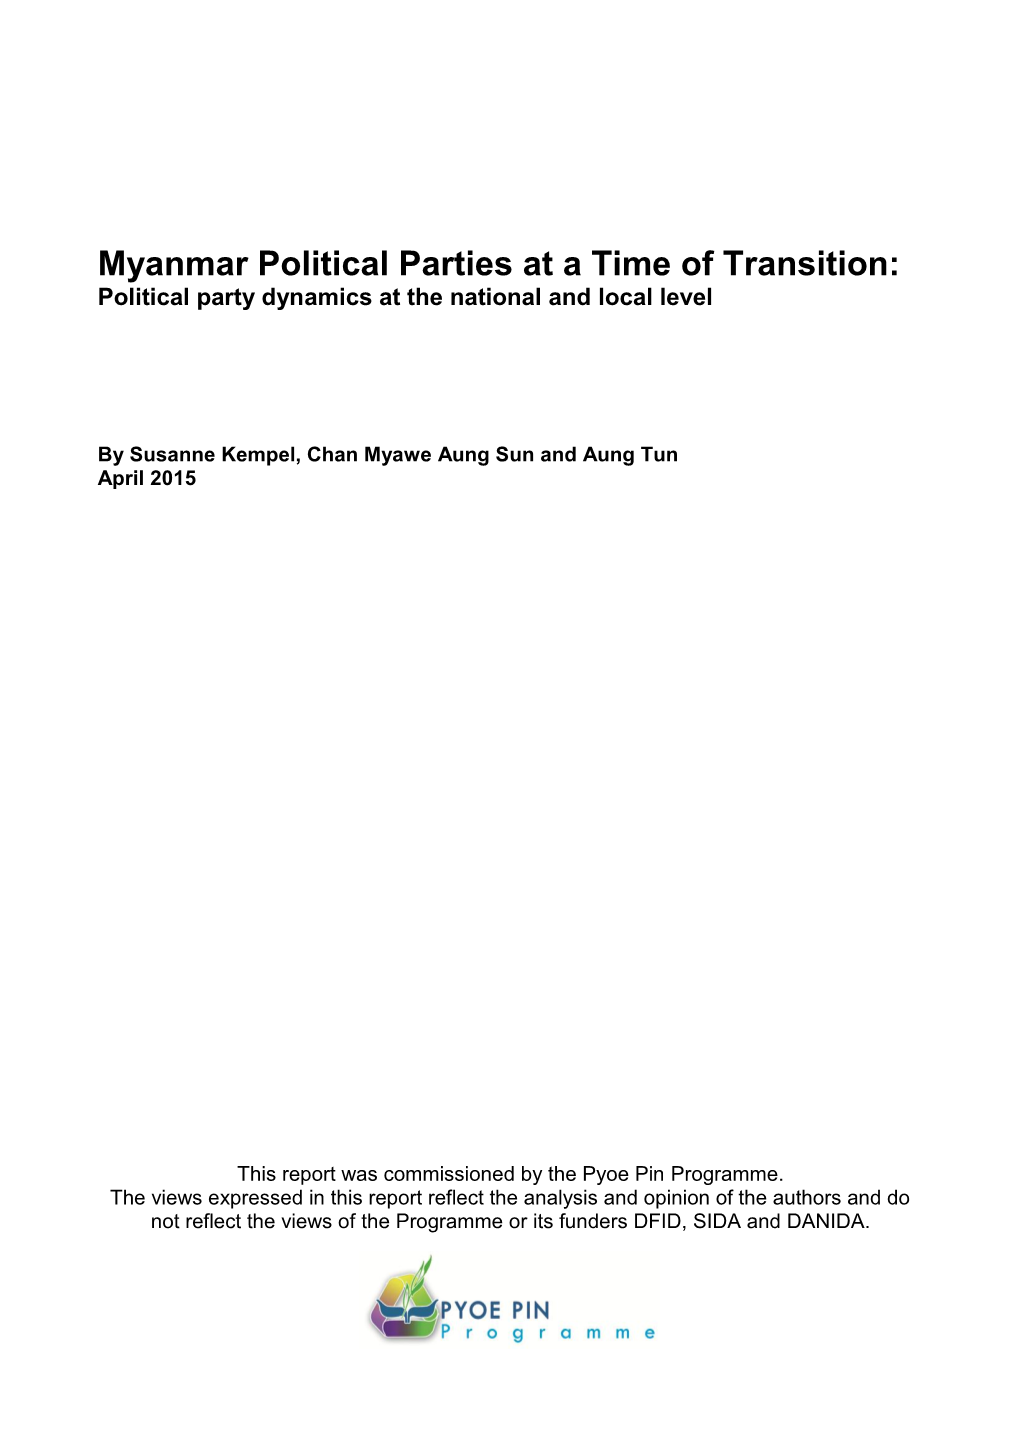 Myanmar Political Parties at a Time of Transition: Political Party Dynamics at the National and Local Level